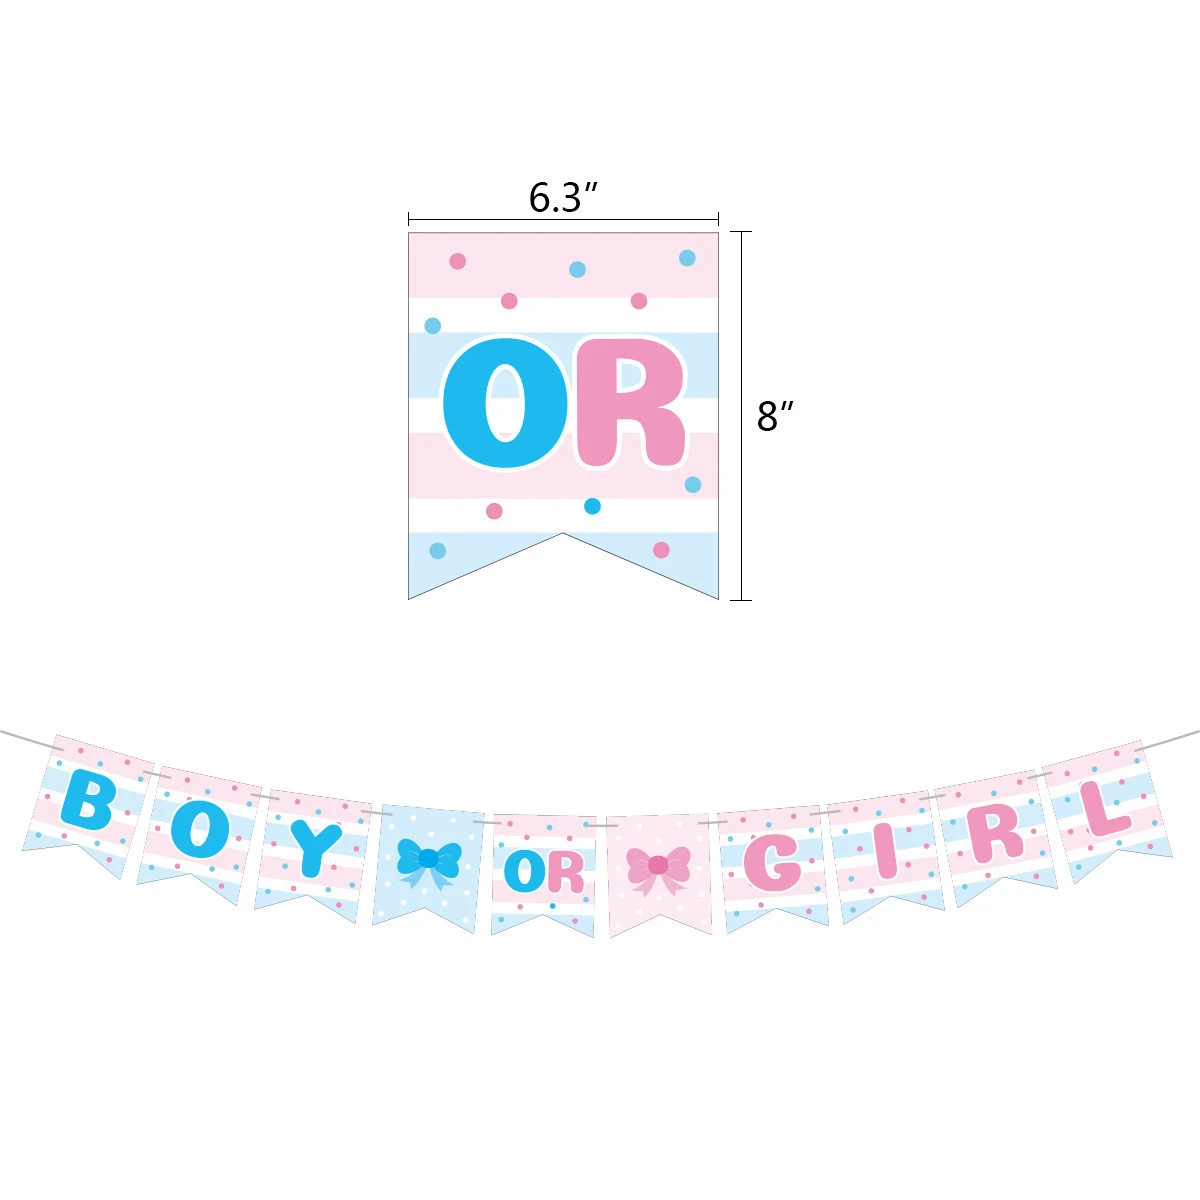 Stone Original Design  Amazon Hot Sell Boy or Girl Gender Reveal Banner Party, Baby shower Decoration Supplies